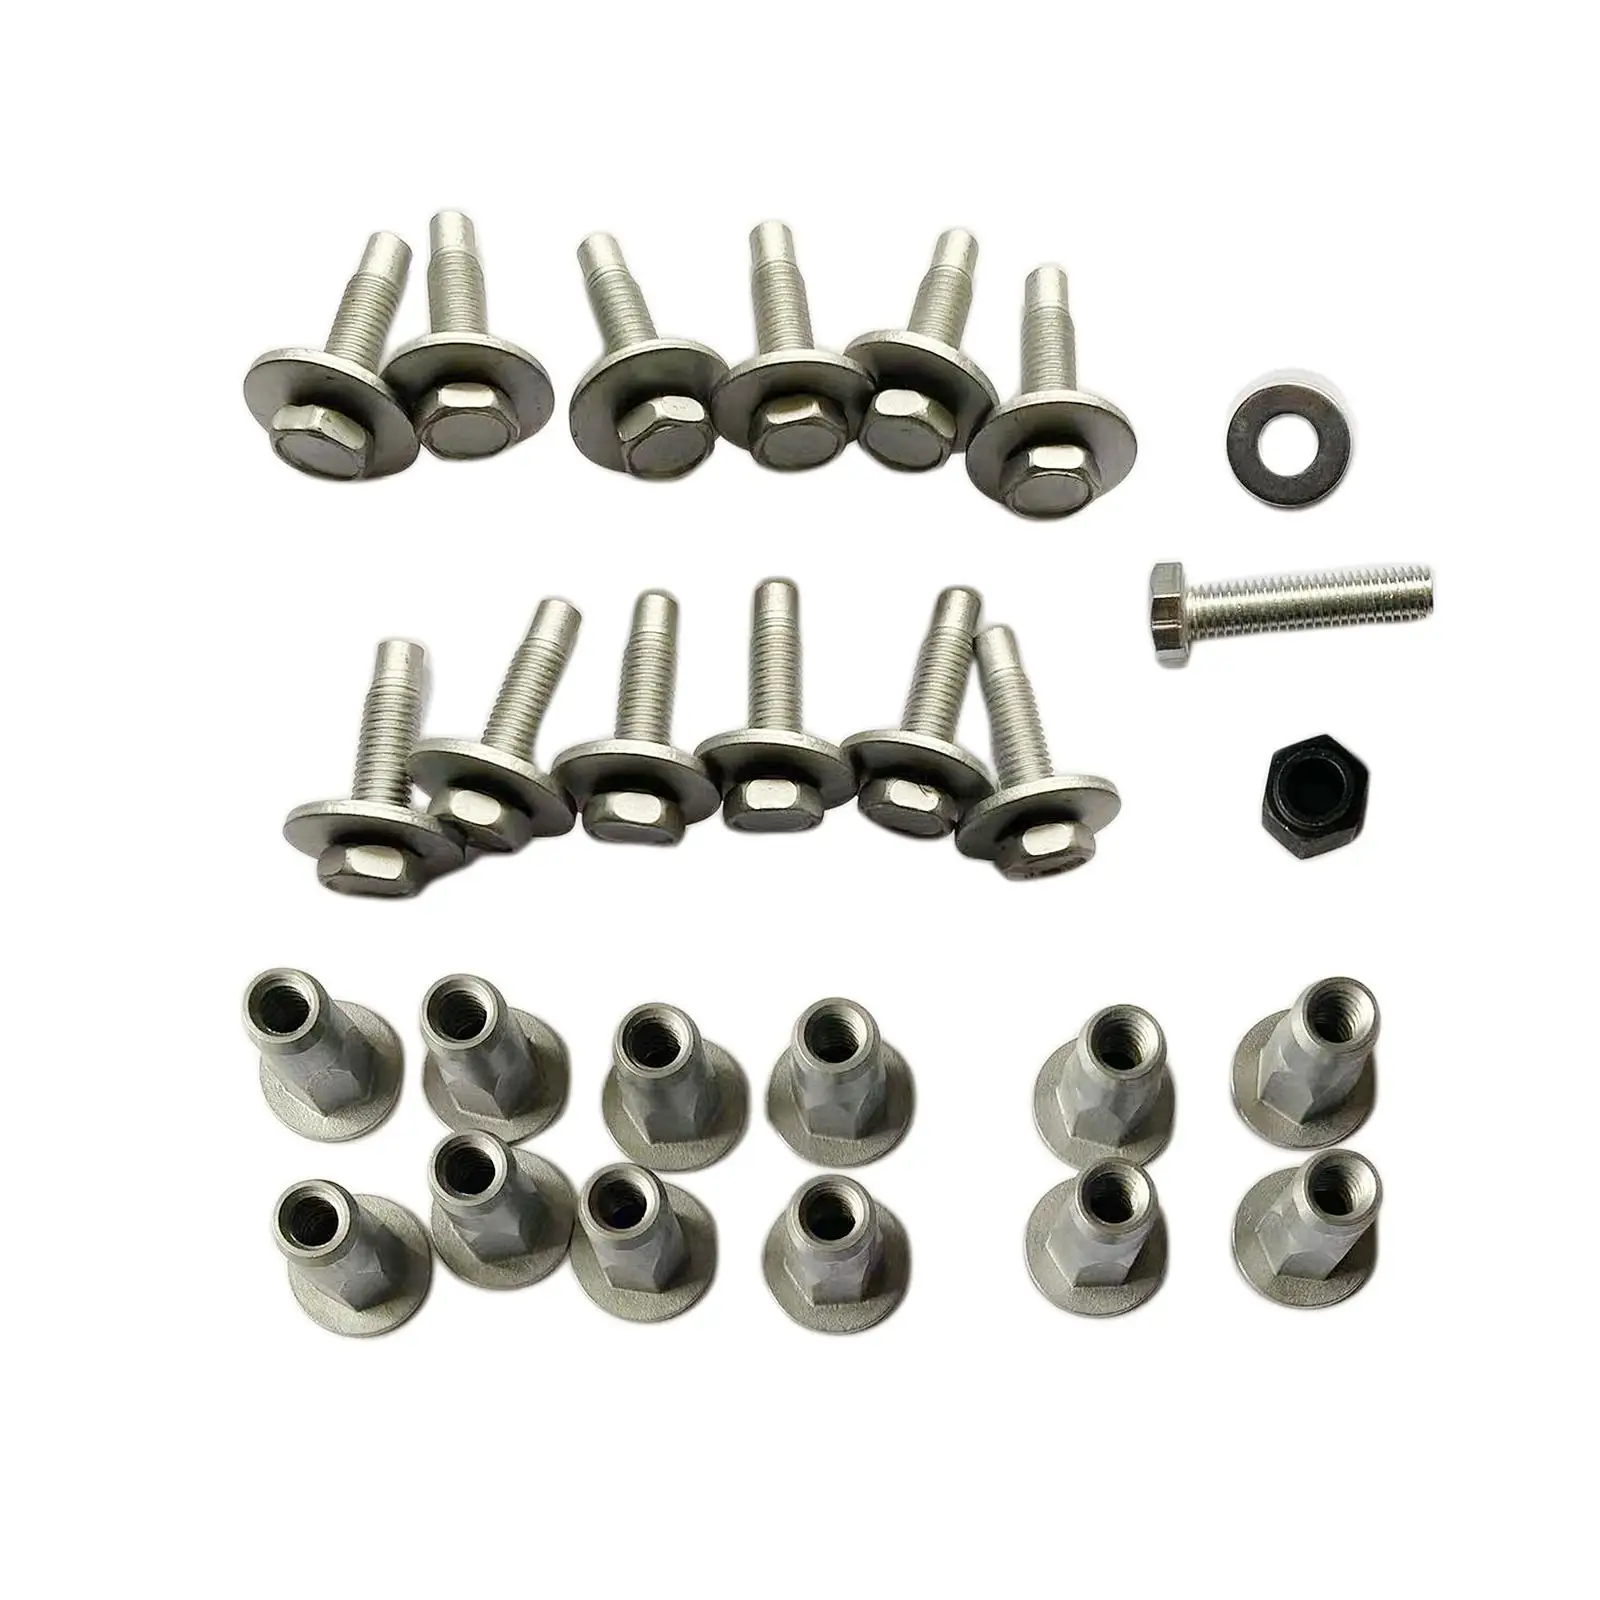 27Pcs Car Sidestep Mounting Kit High Performance Nuts Bolts Set Auto for Dodge RAM 1500 2500 3500 Repair Accessories